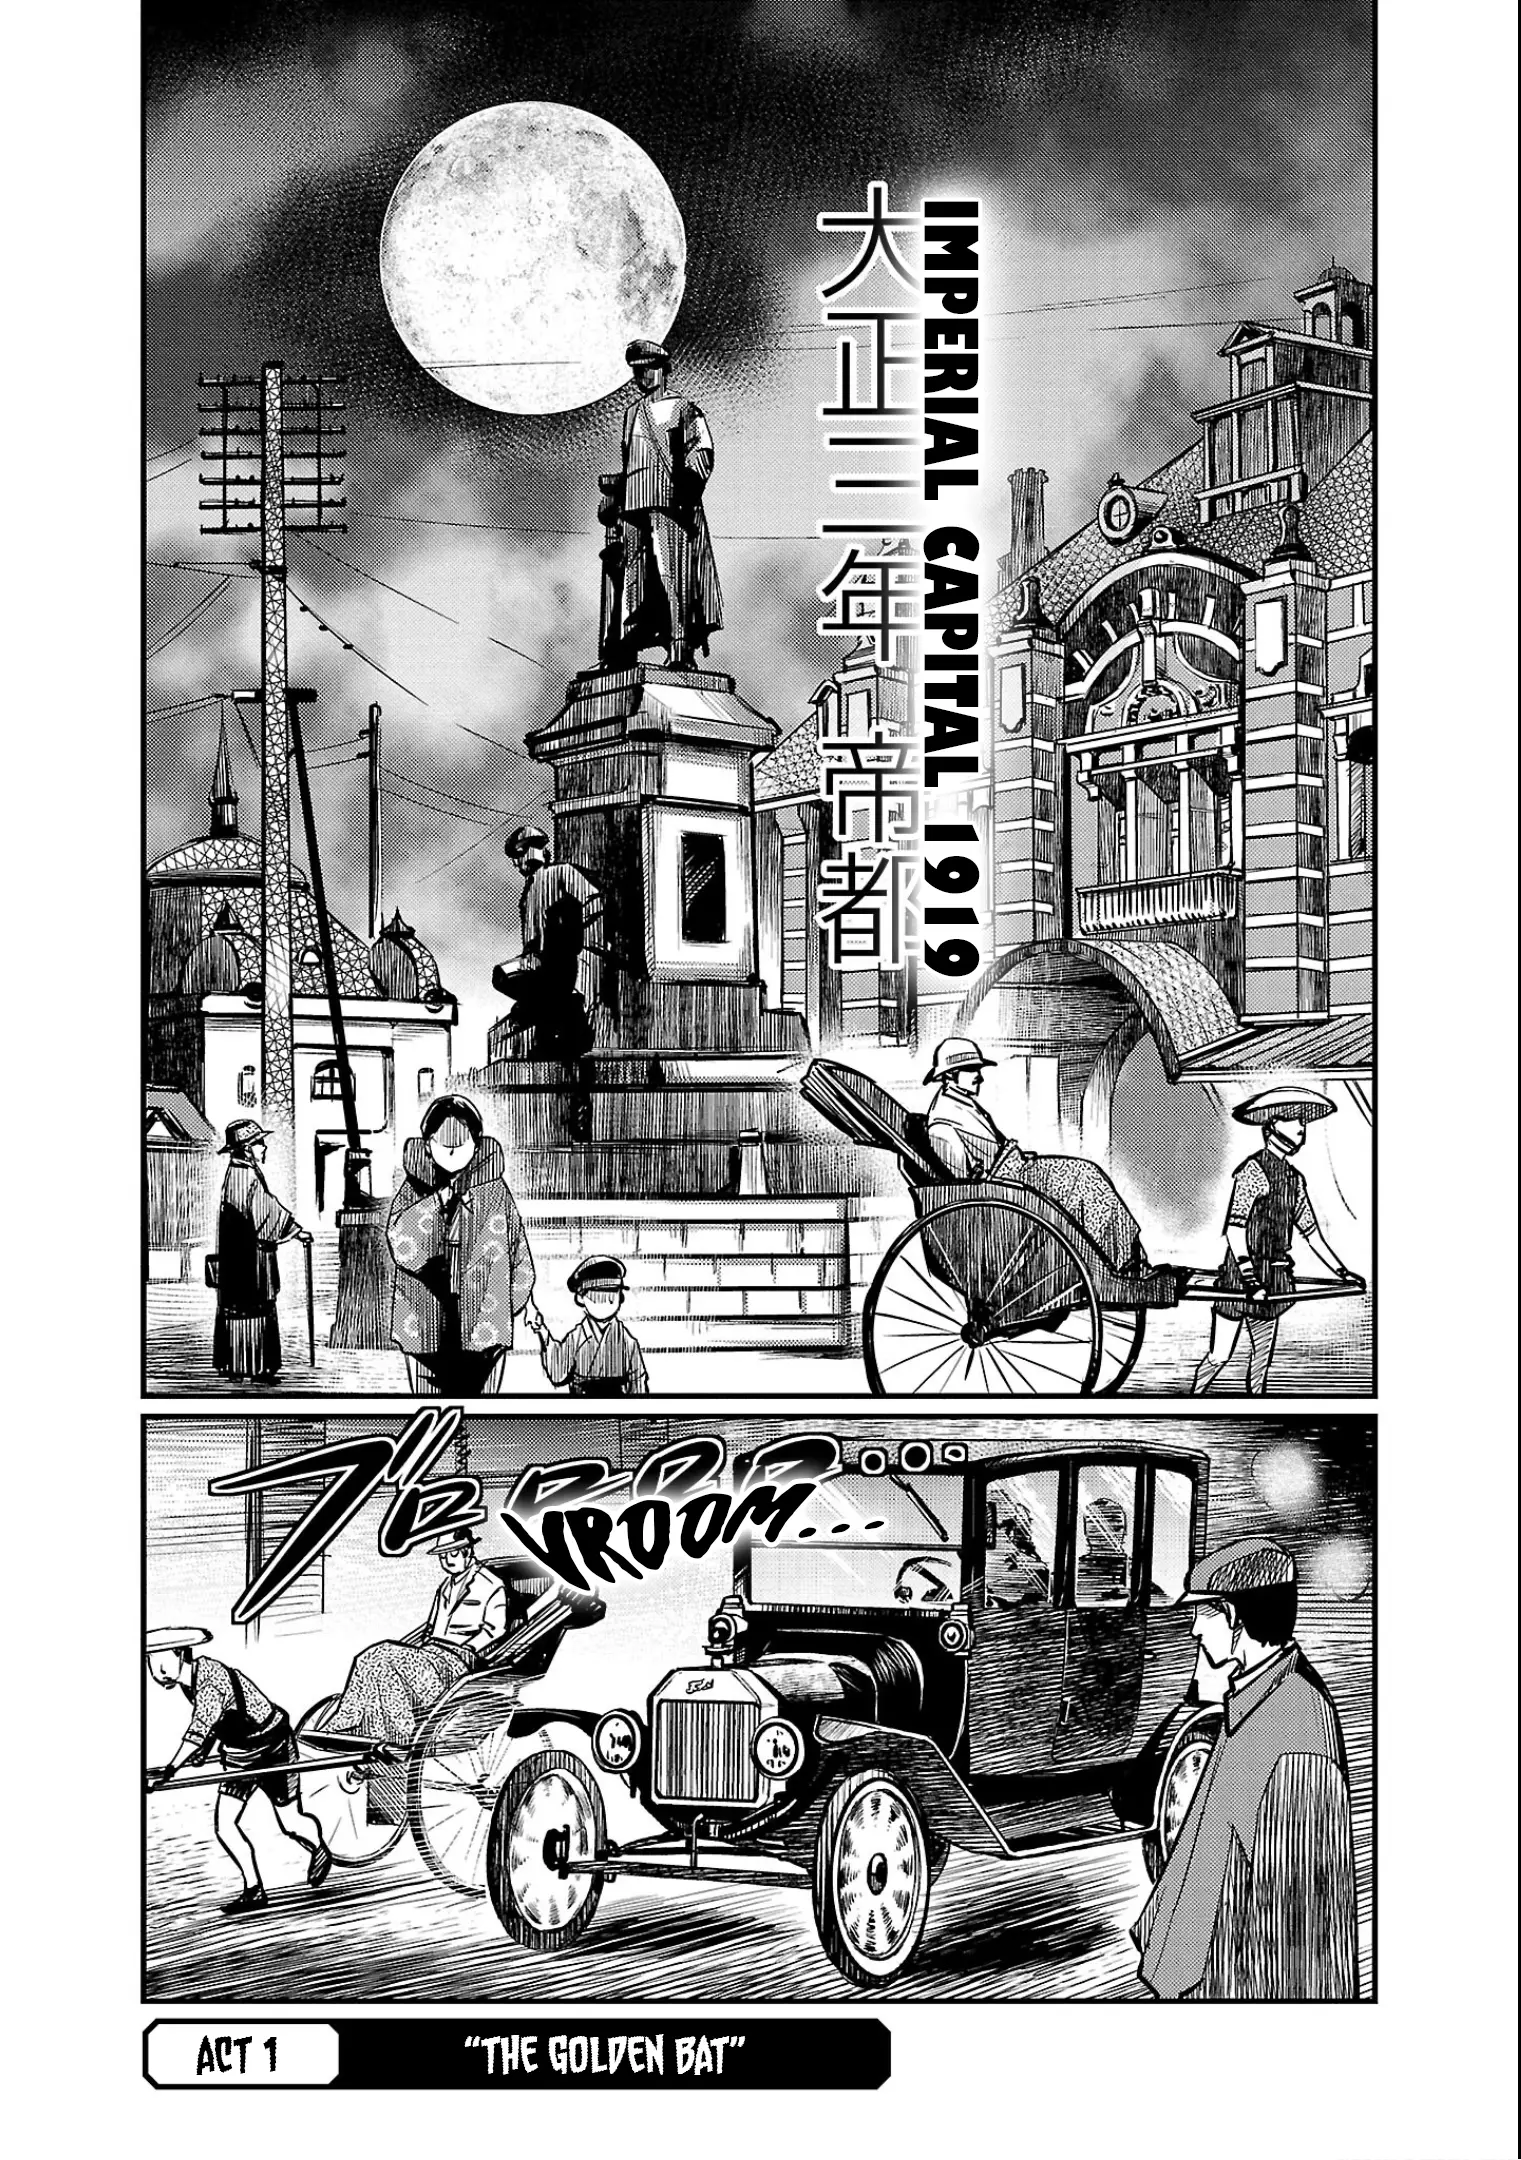 Golden Bat - A Mysterious Story Of The Taisho Era's Skull - 1 page 3-24425d3d